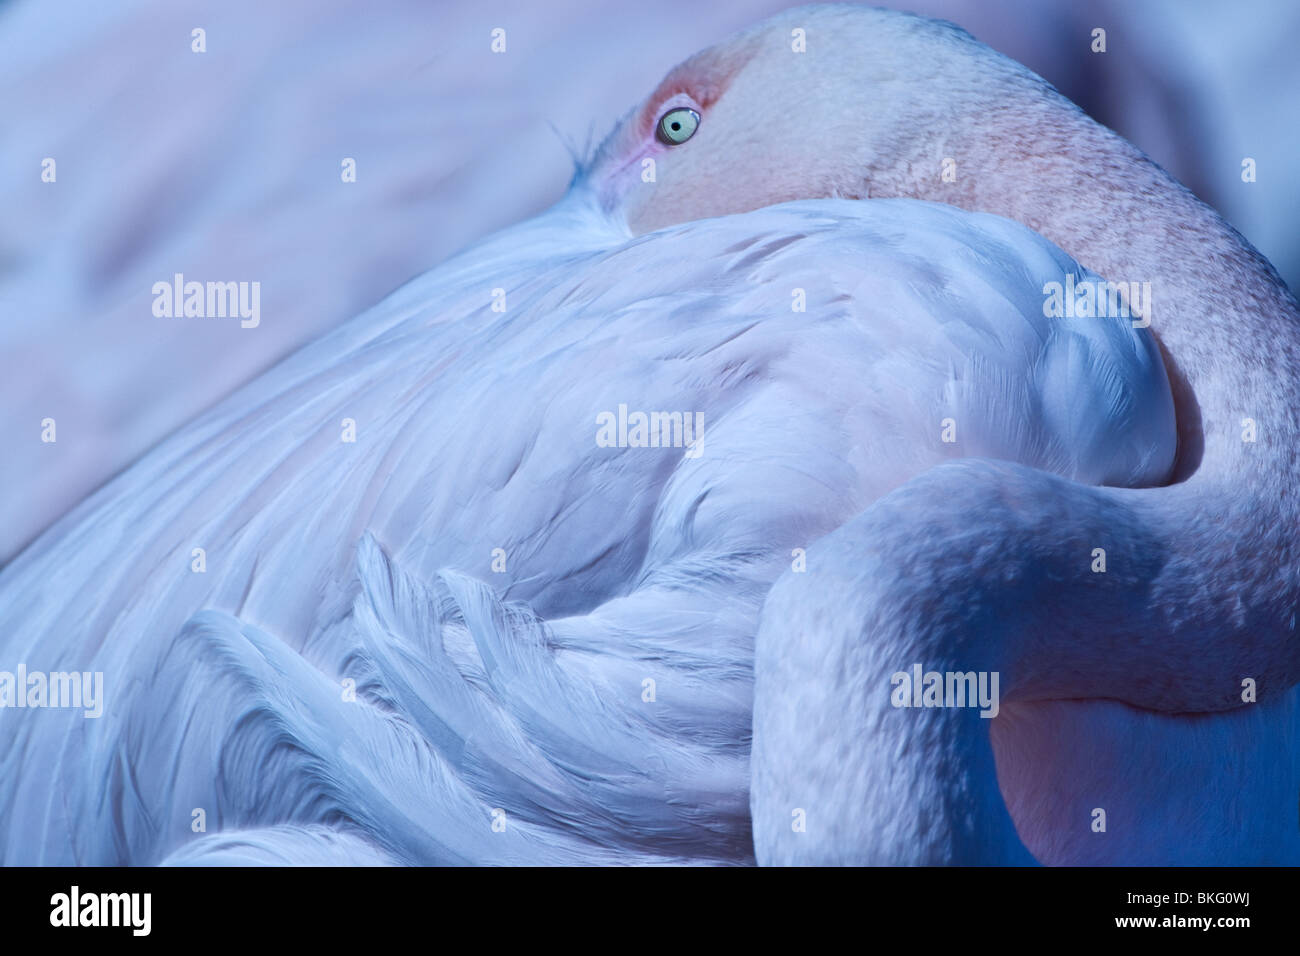 A close up photo of a flamingo resting its neck on its body, its open eye keeping a wary lookout Stock Photo